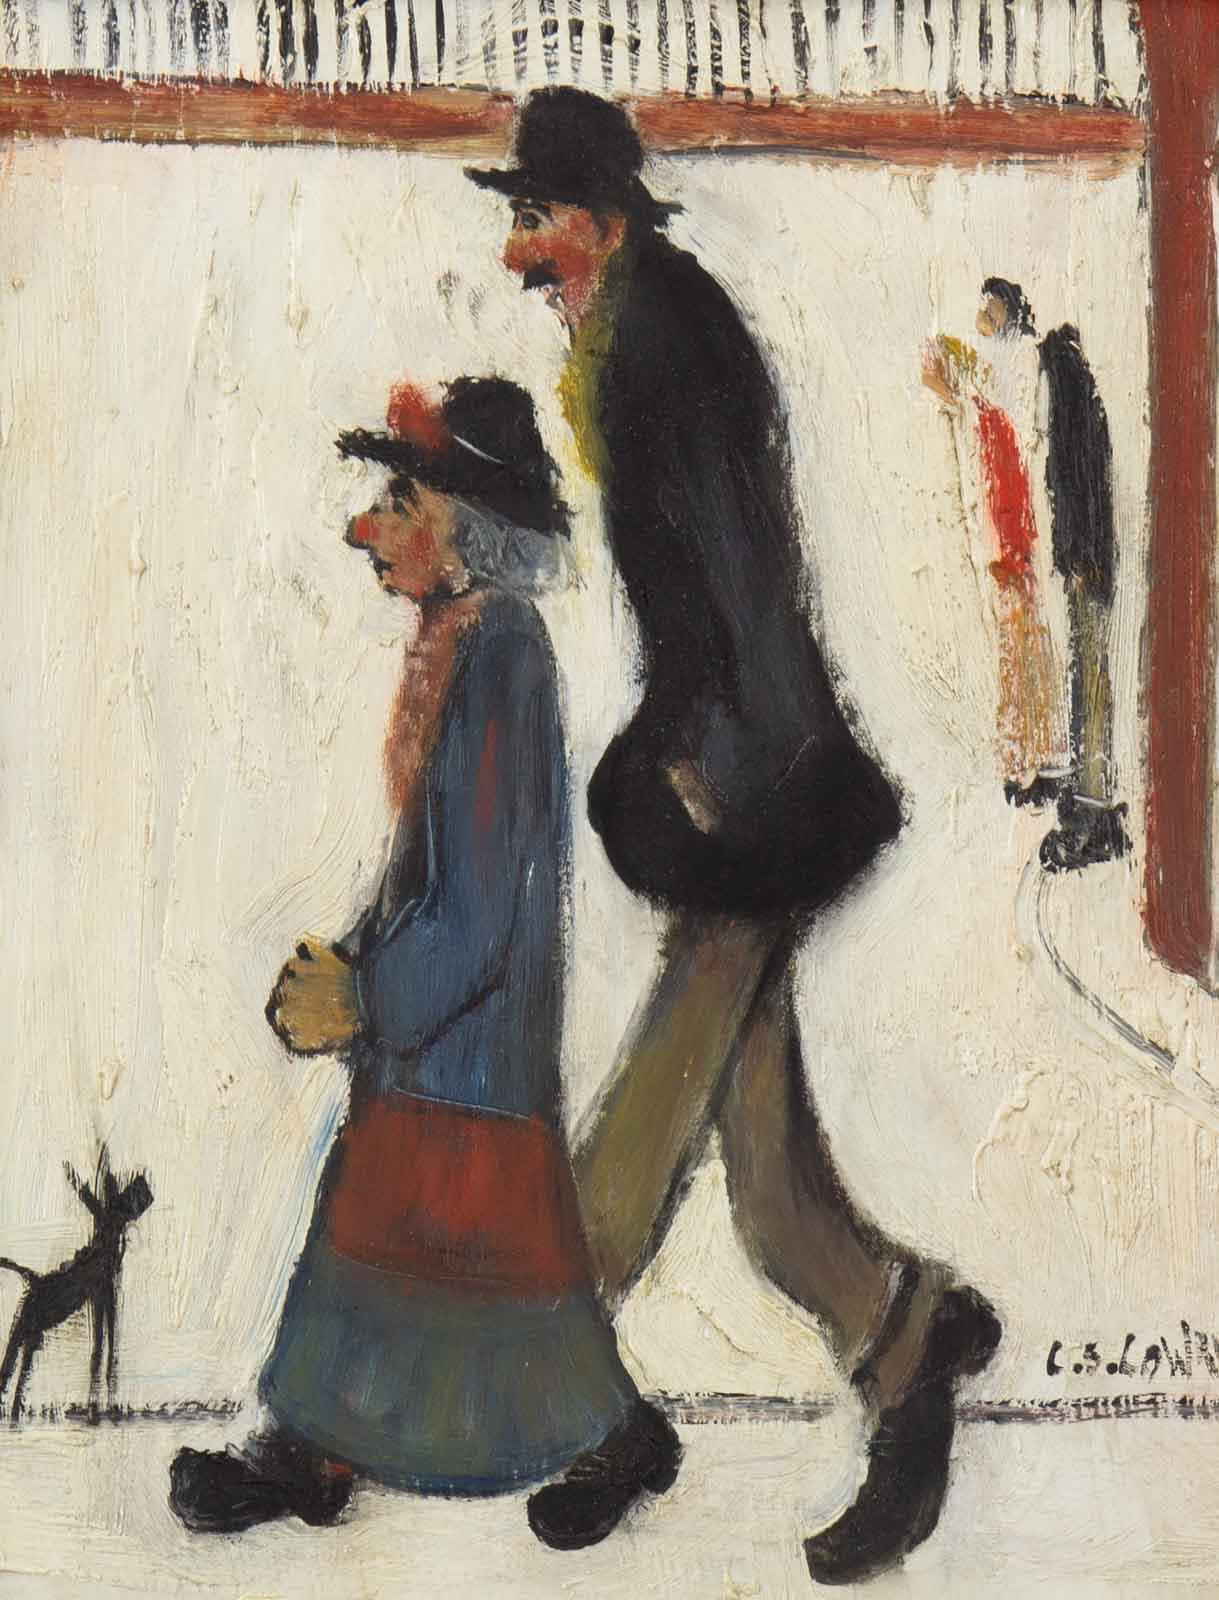 Two Figures Walking after L.S.Lowry